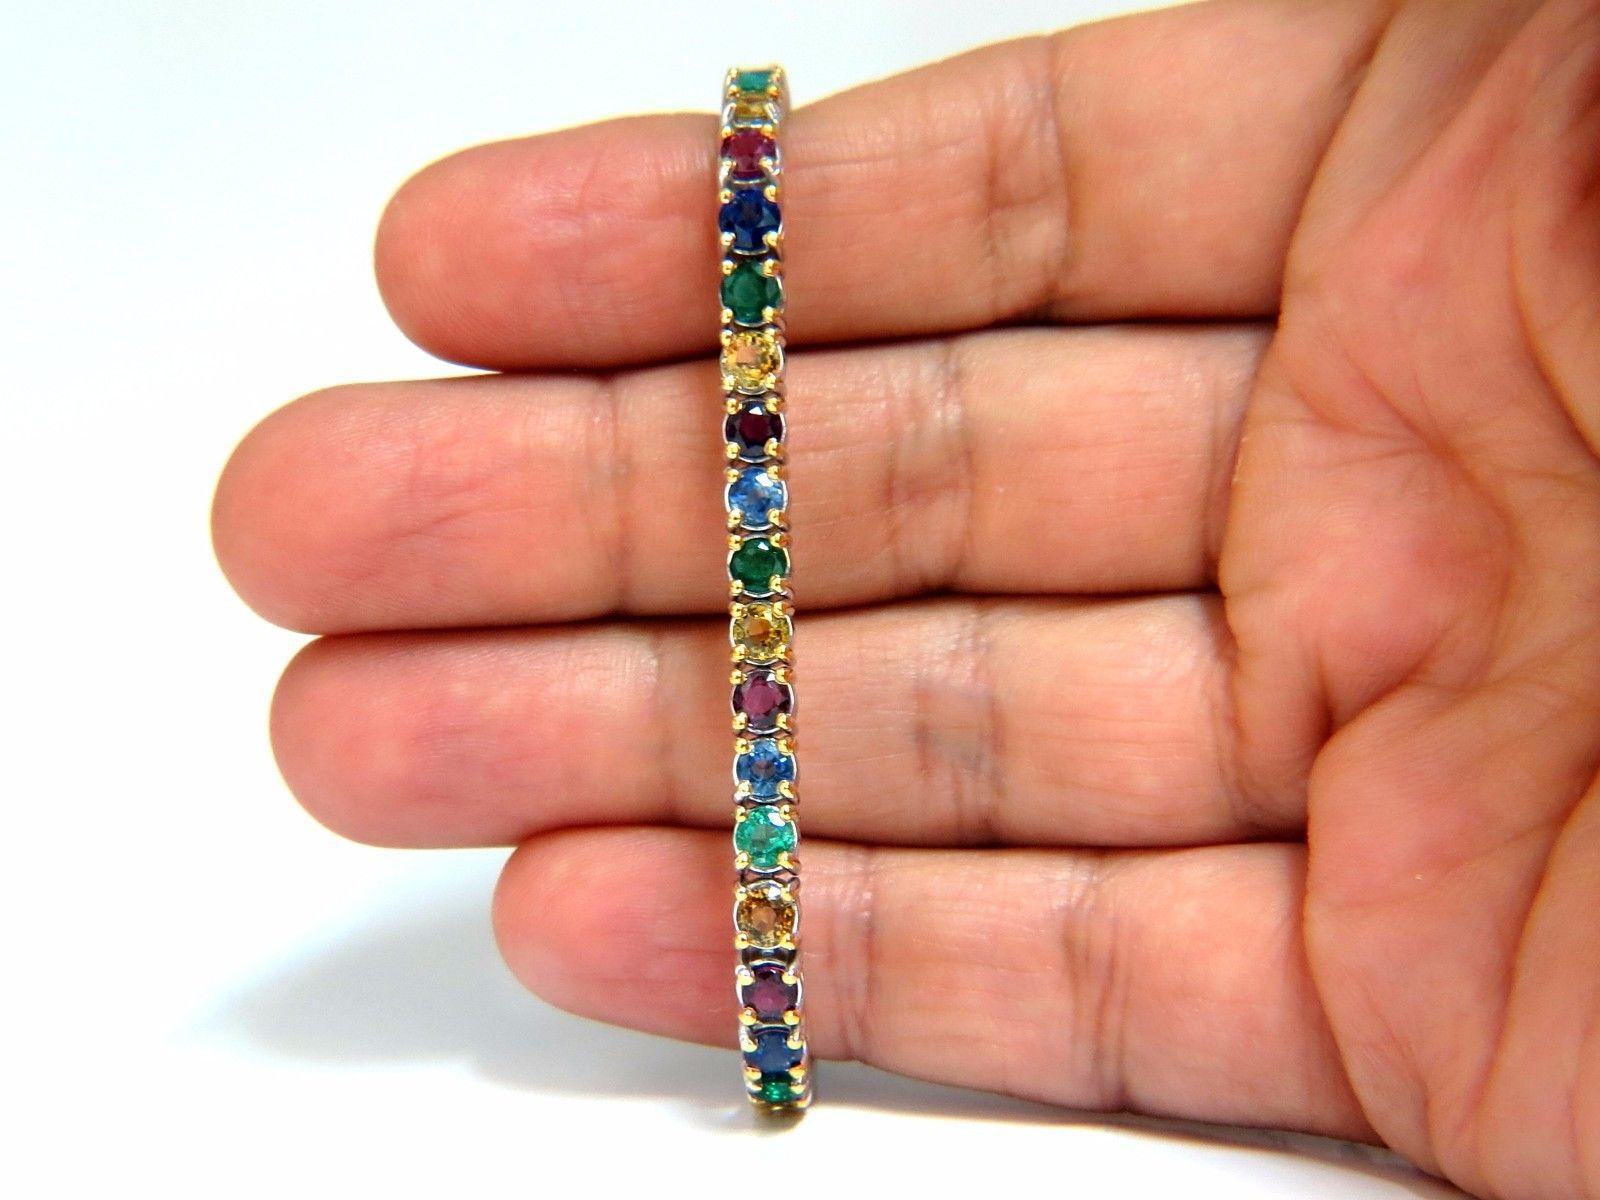 Gem Line.

12.00ct. Natural Sapphires, Ruby, & Emeralds bracelet.

Full round cuts, great sparkle.

Multicolor sapphires.

Vibrant Greens, Orange, Reds, yellows, Blues & Purple

Clean Clarity & Transparent.

Secure pressure clasp and safety